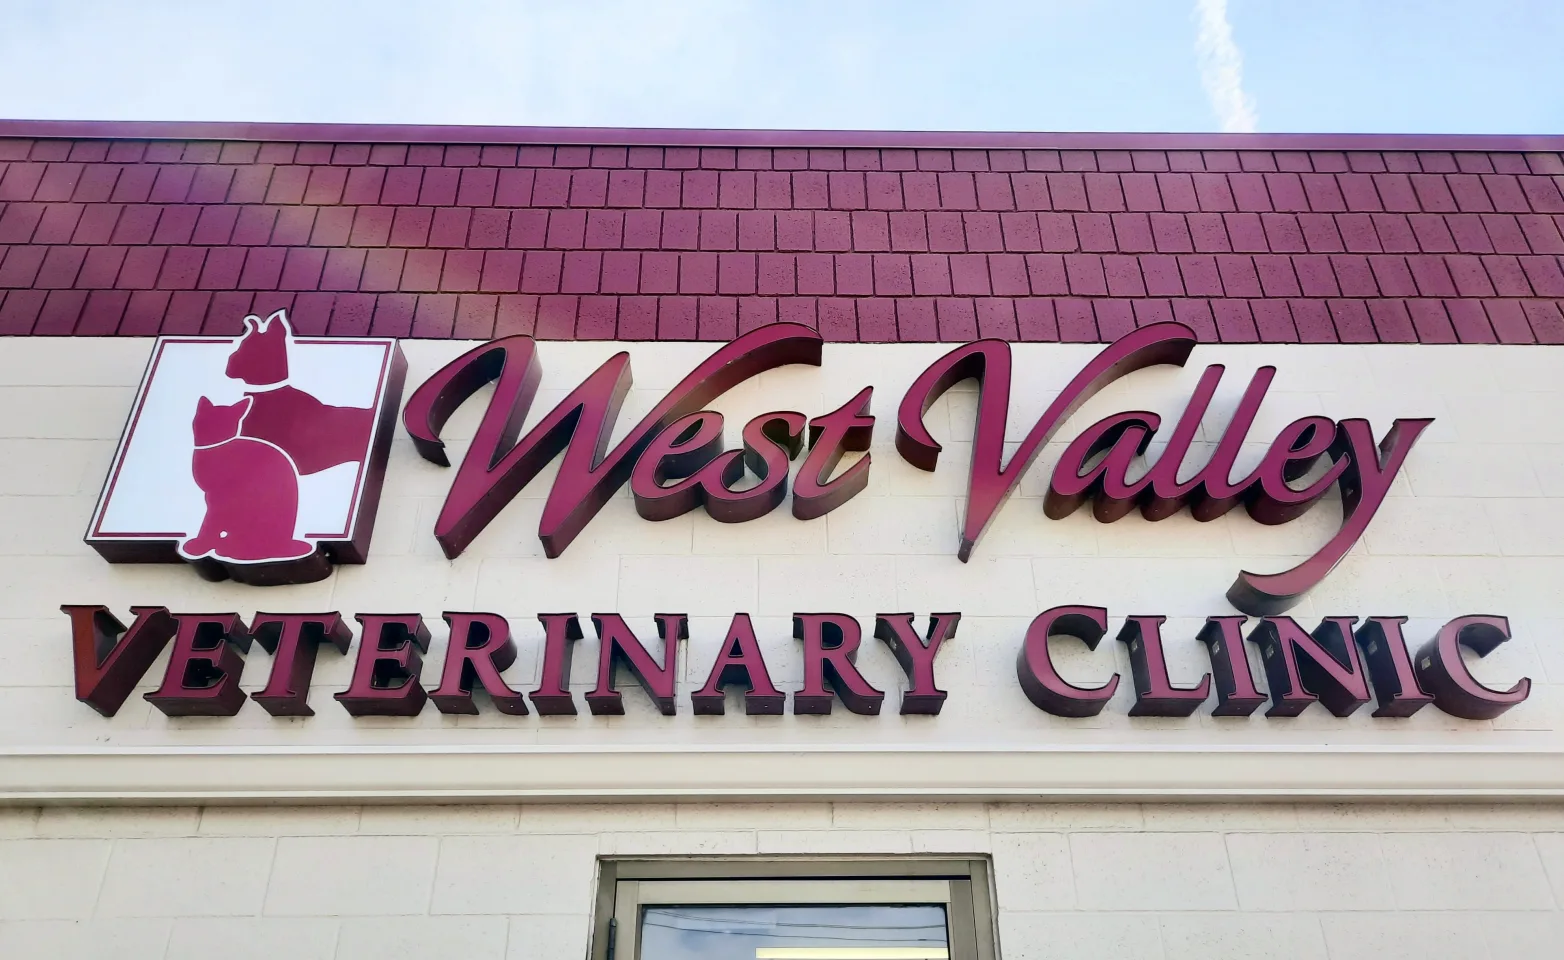 West Valley Veterinary Clinic Entrance and outdoor signage